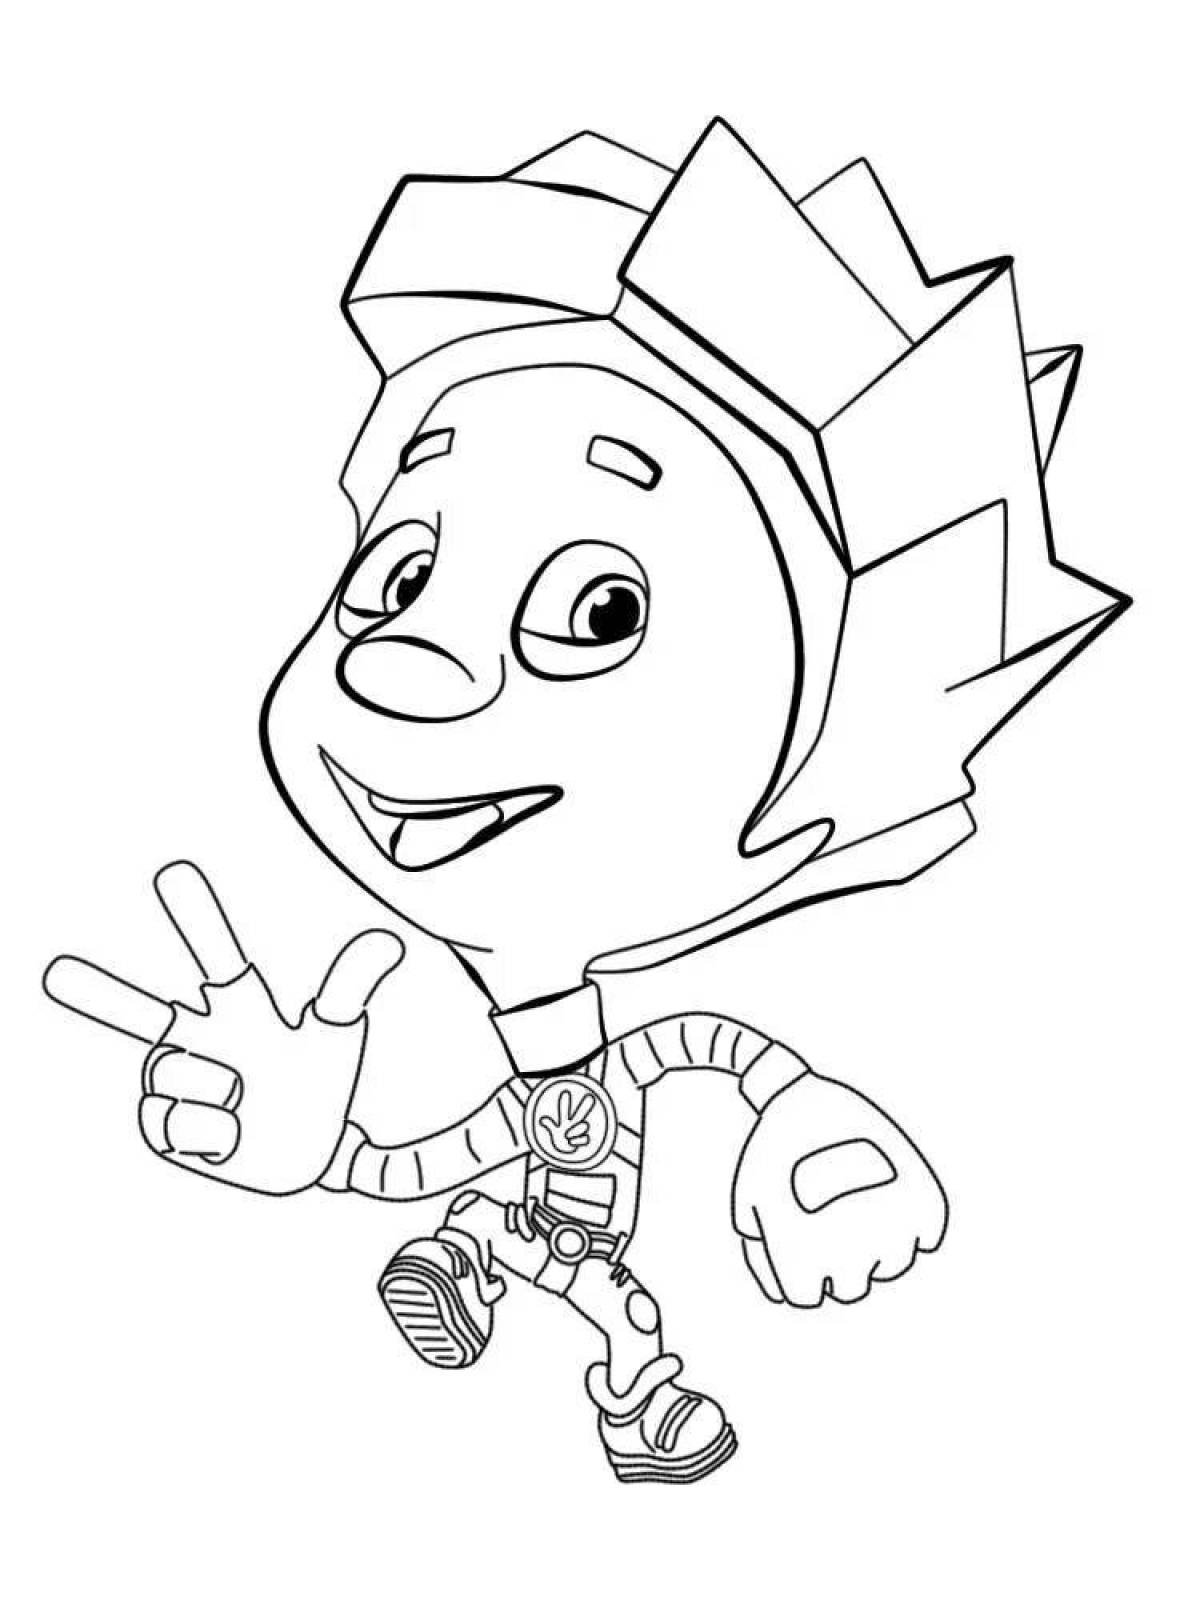 Coloring page glowing ember fire